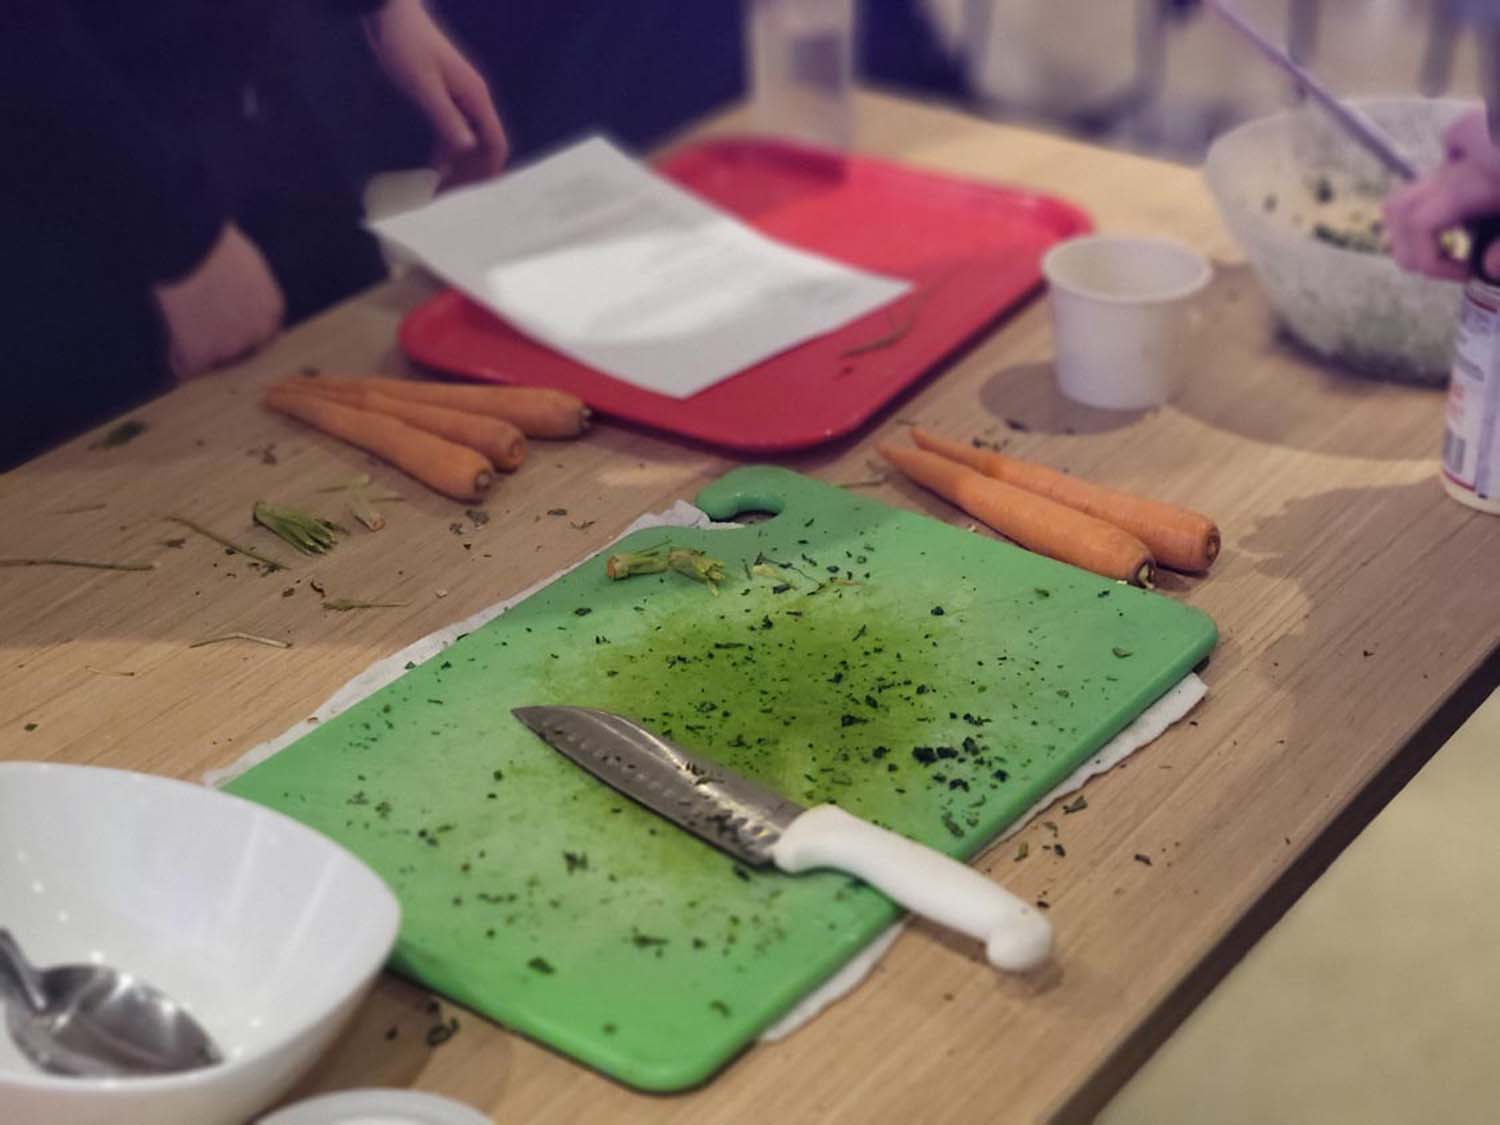 A cutting board sitting on a table with a knife on it. There are several carrots on the table also